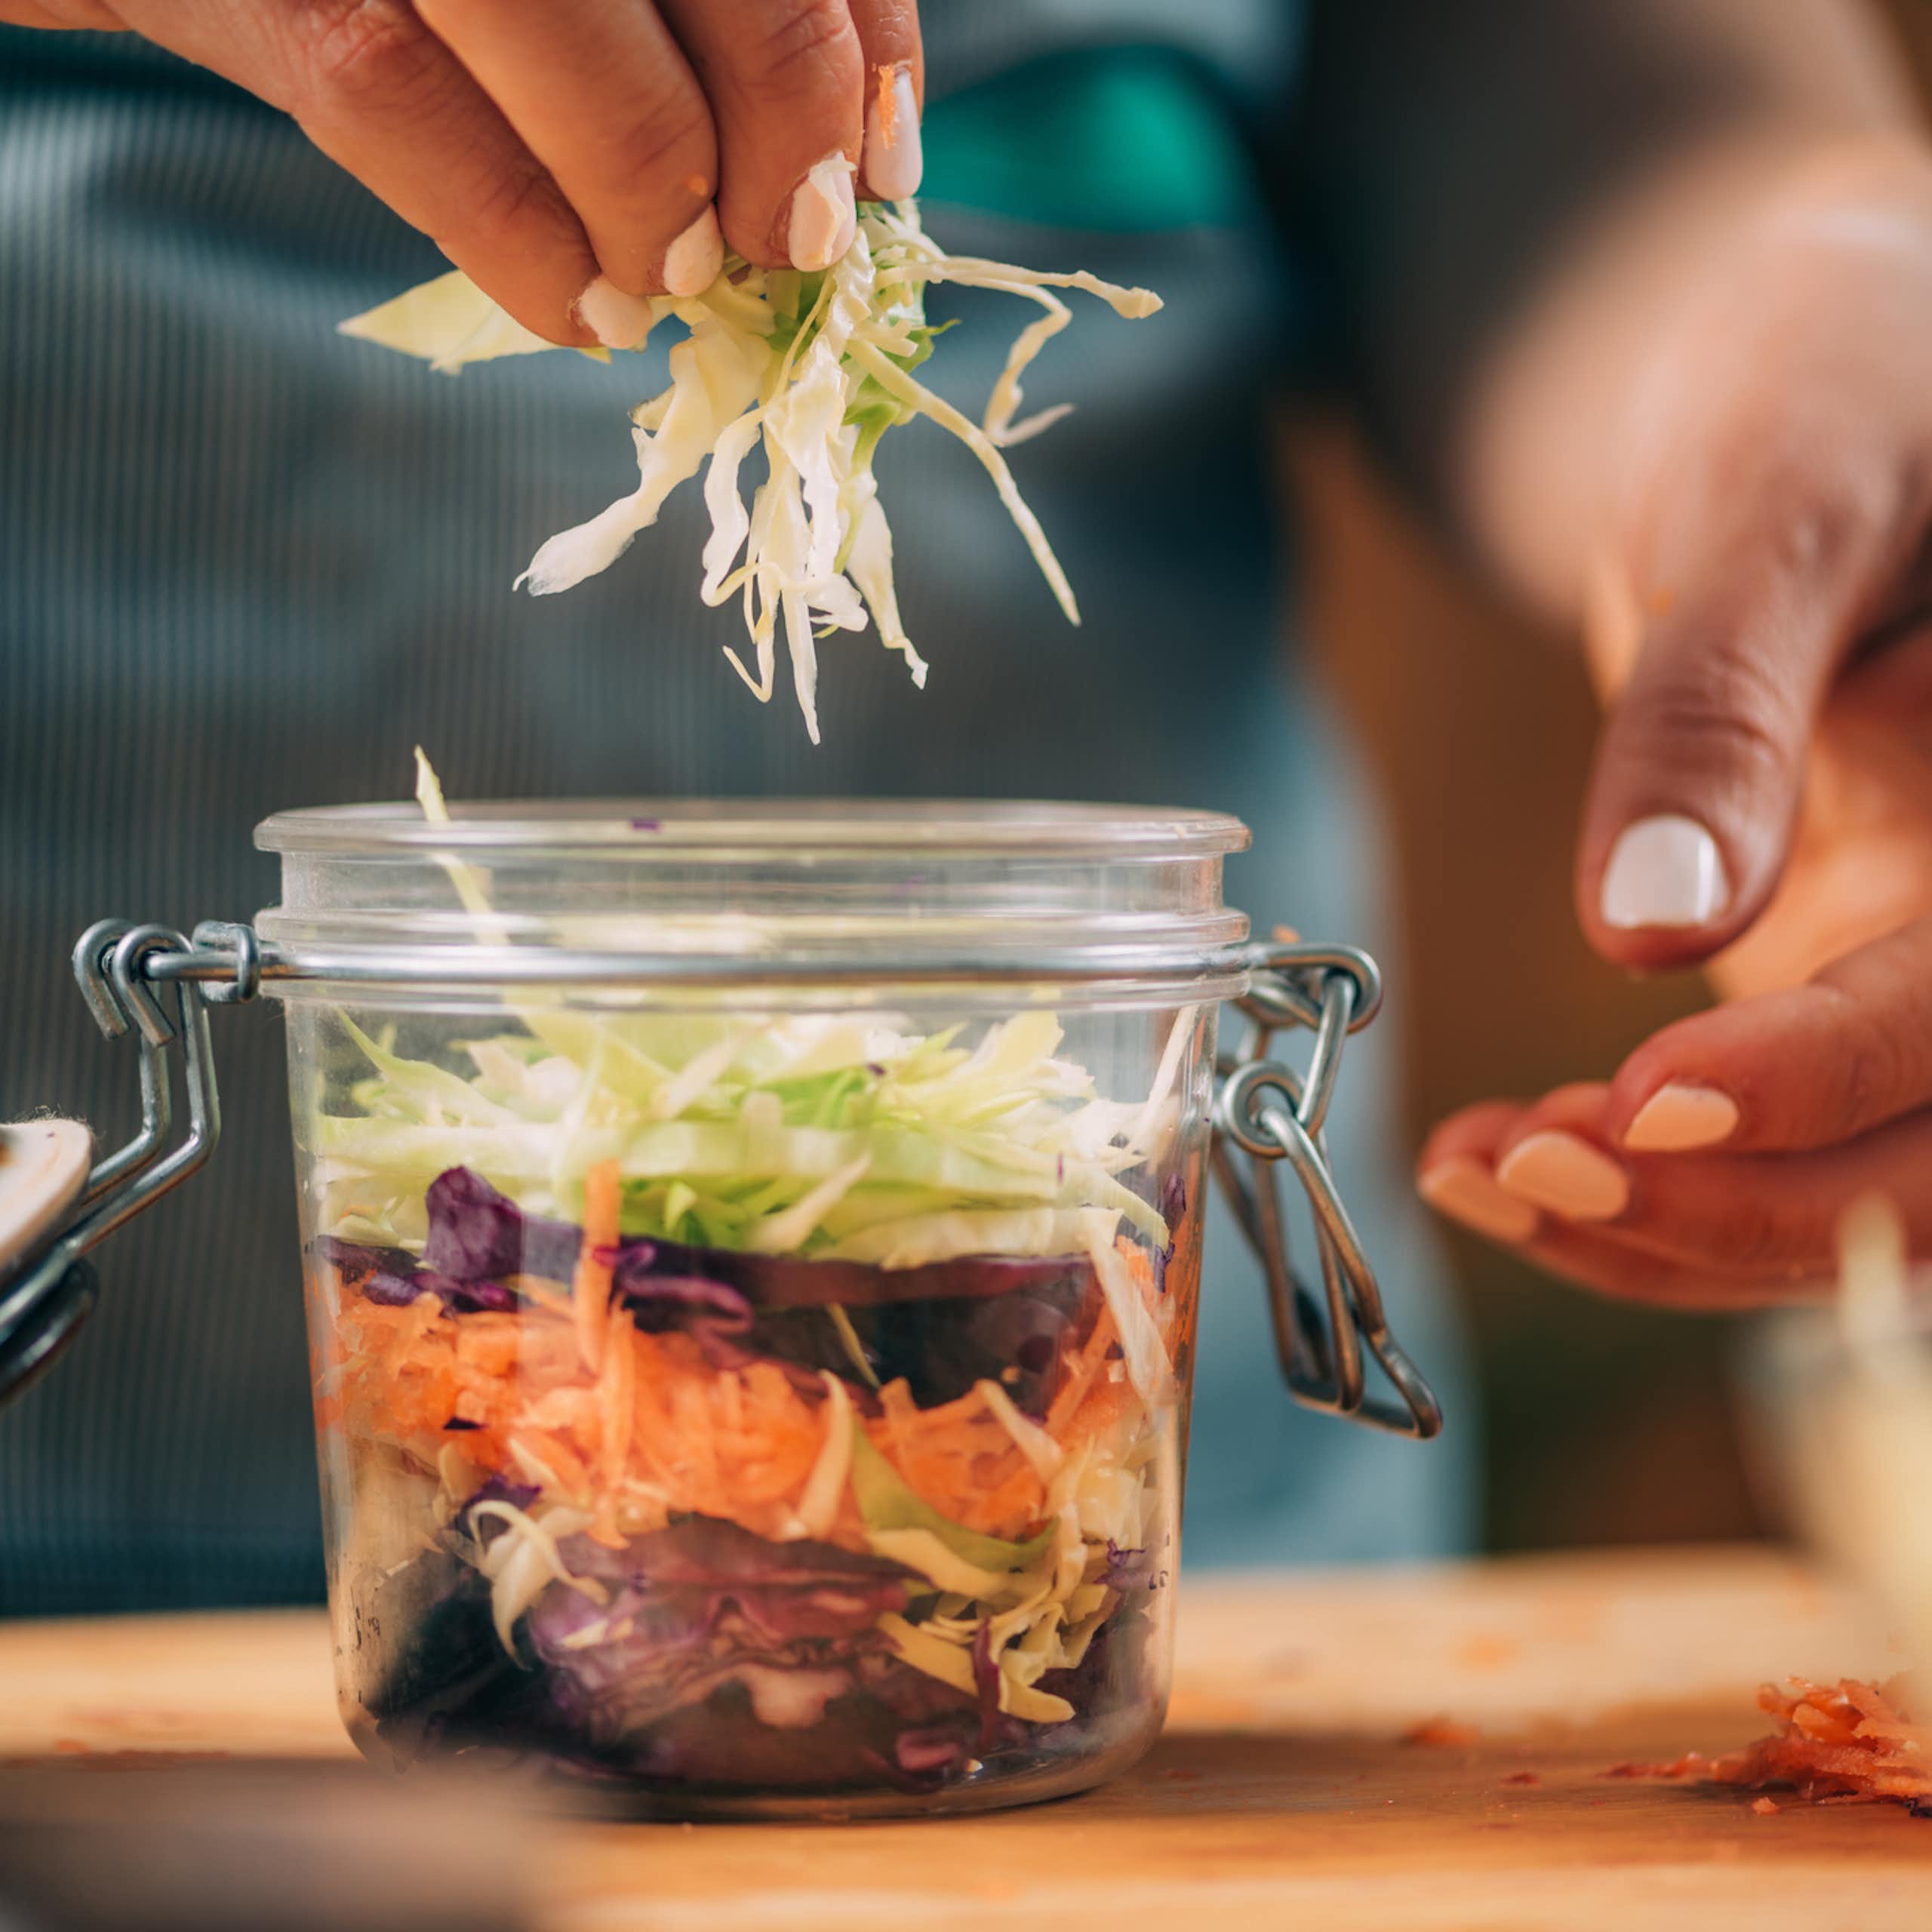 Close-up of person putting shredded cabbage in a jar of other shredded vegetables.